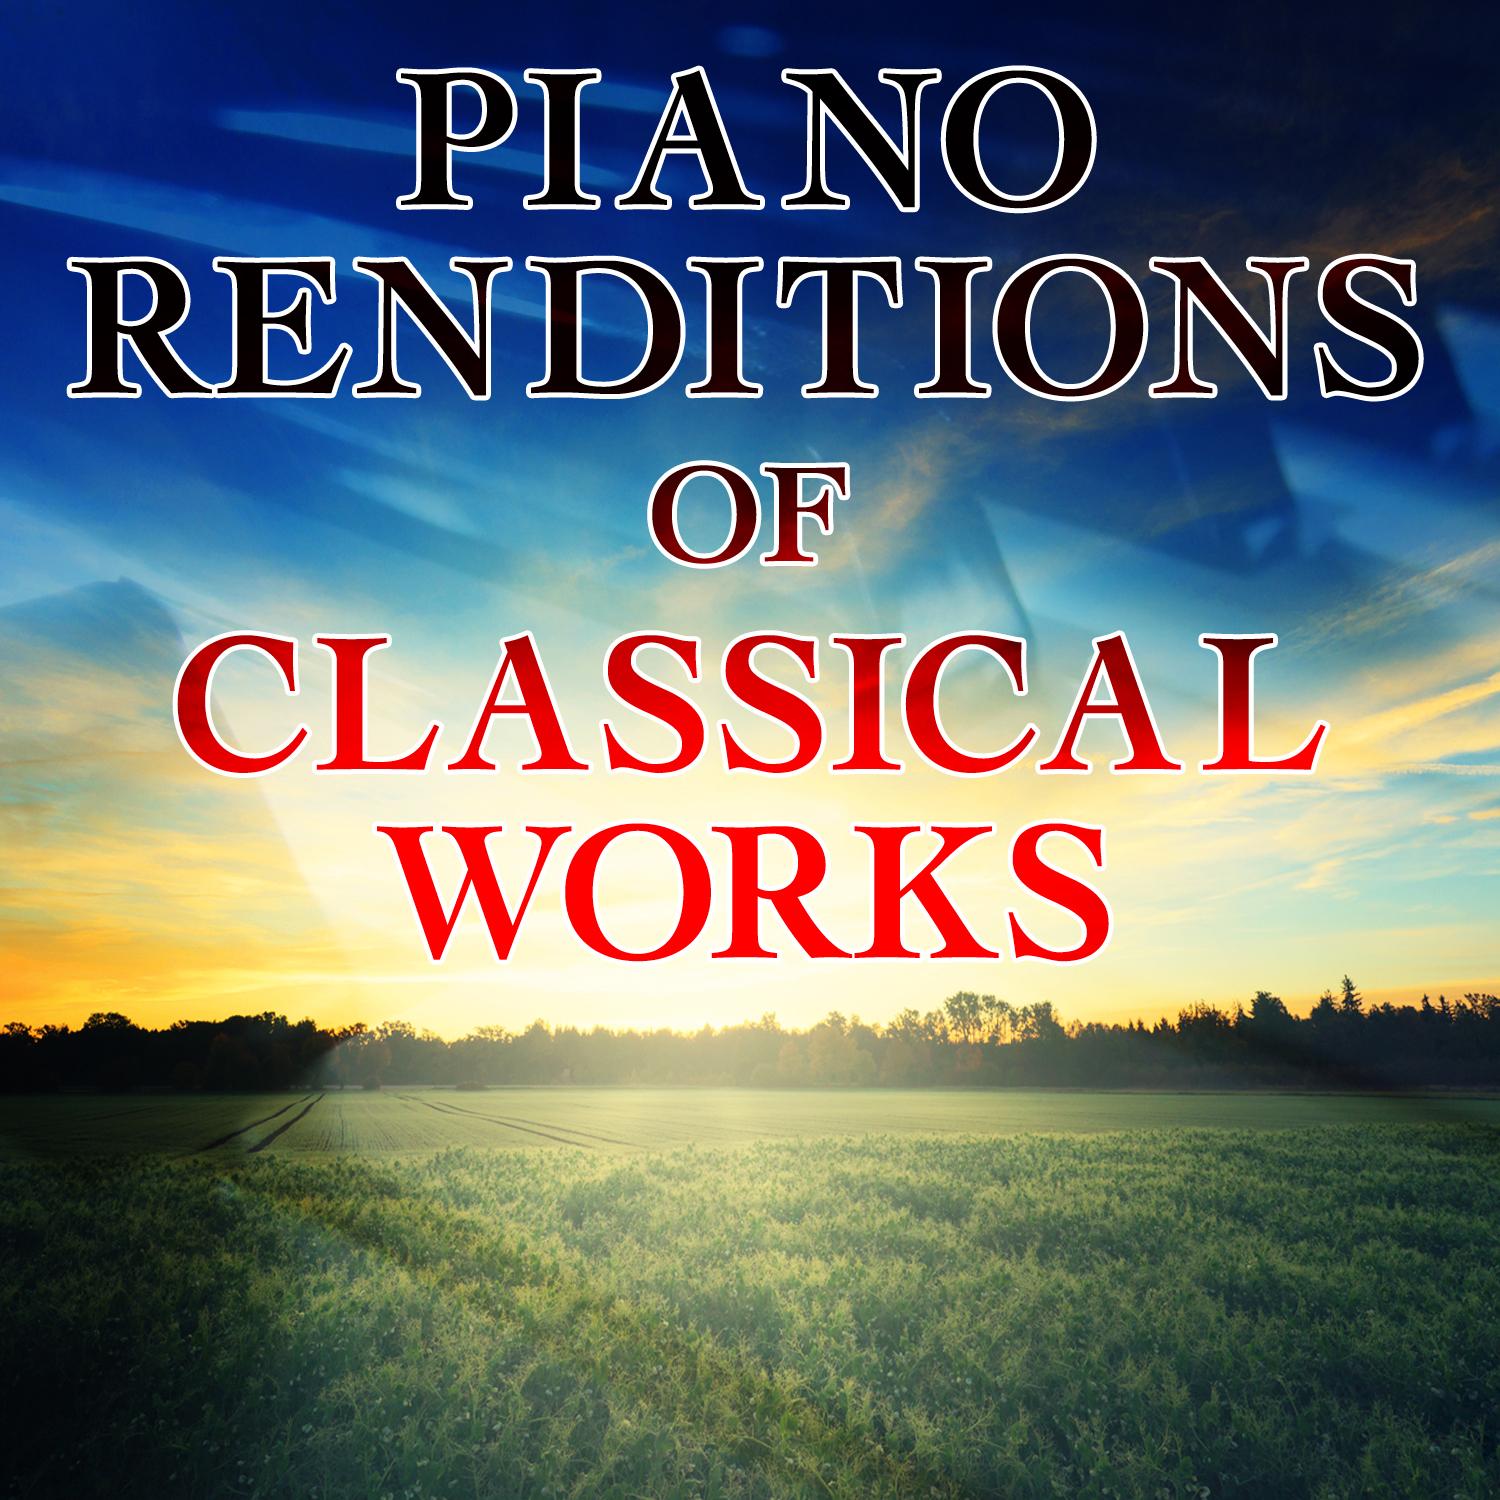 Piano Renditions of Classical Works